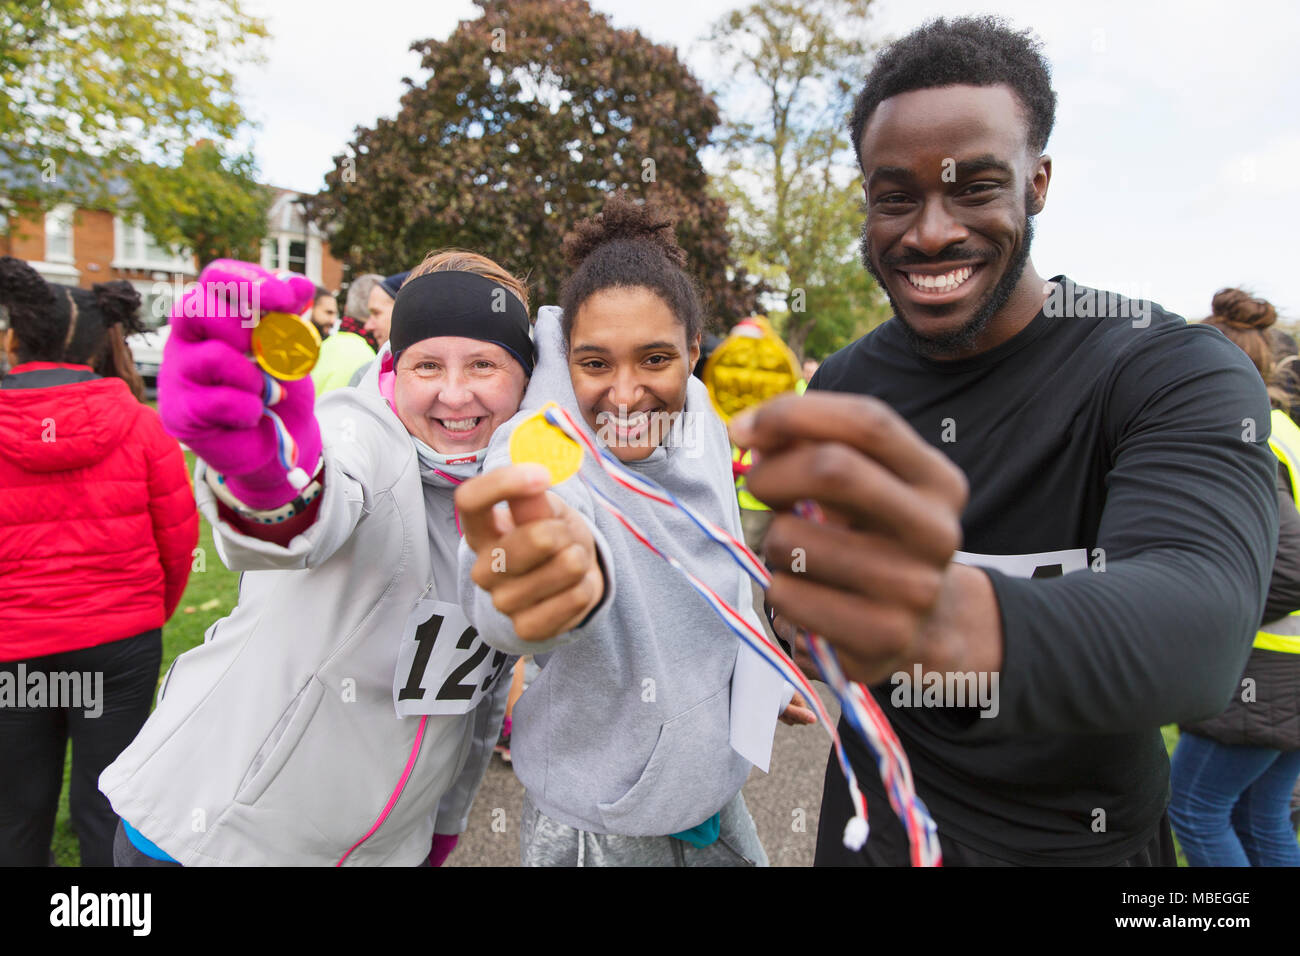 Portrait enthusiastic runners showing medals at charity run in park Stock Photo